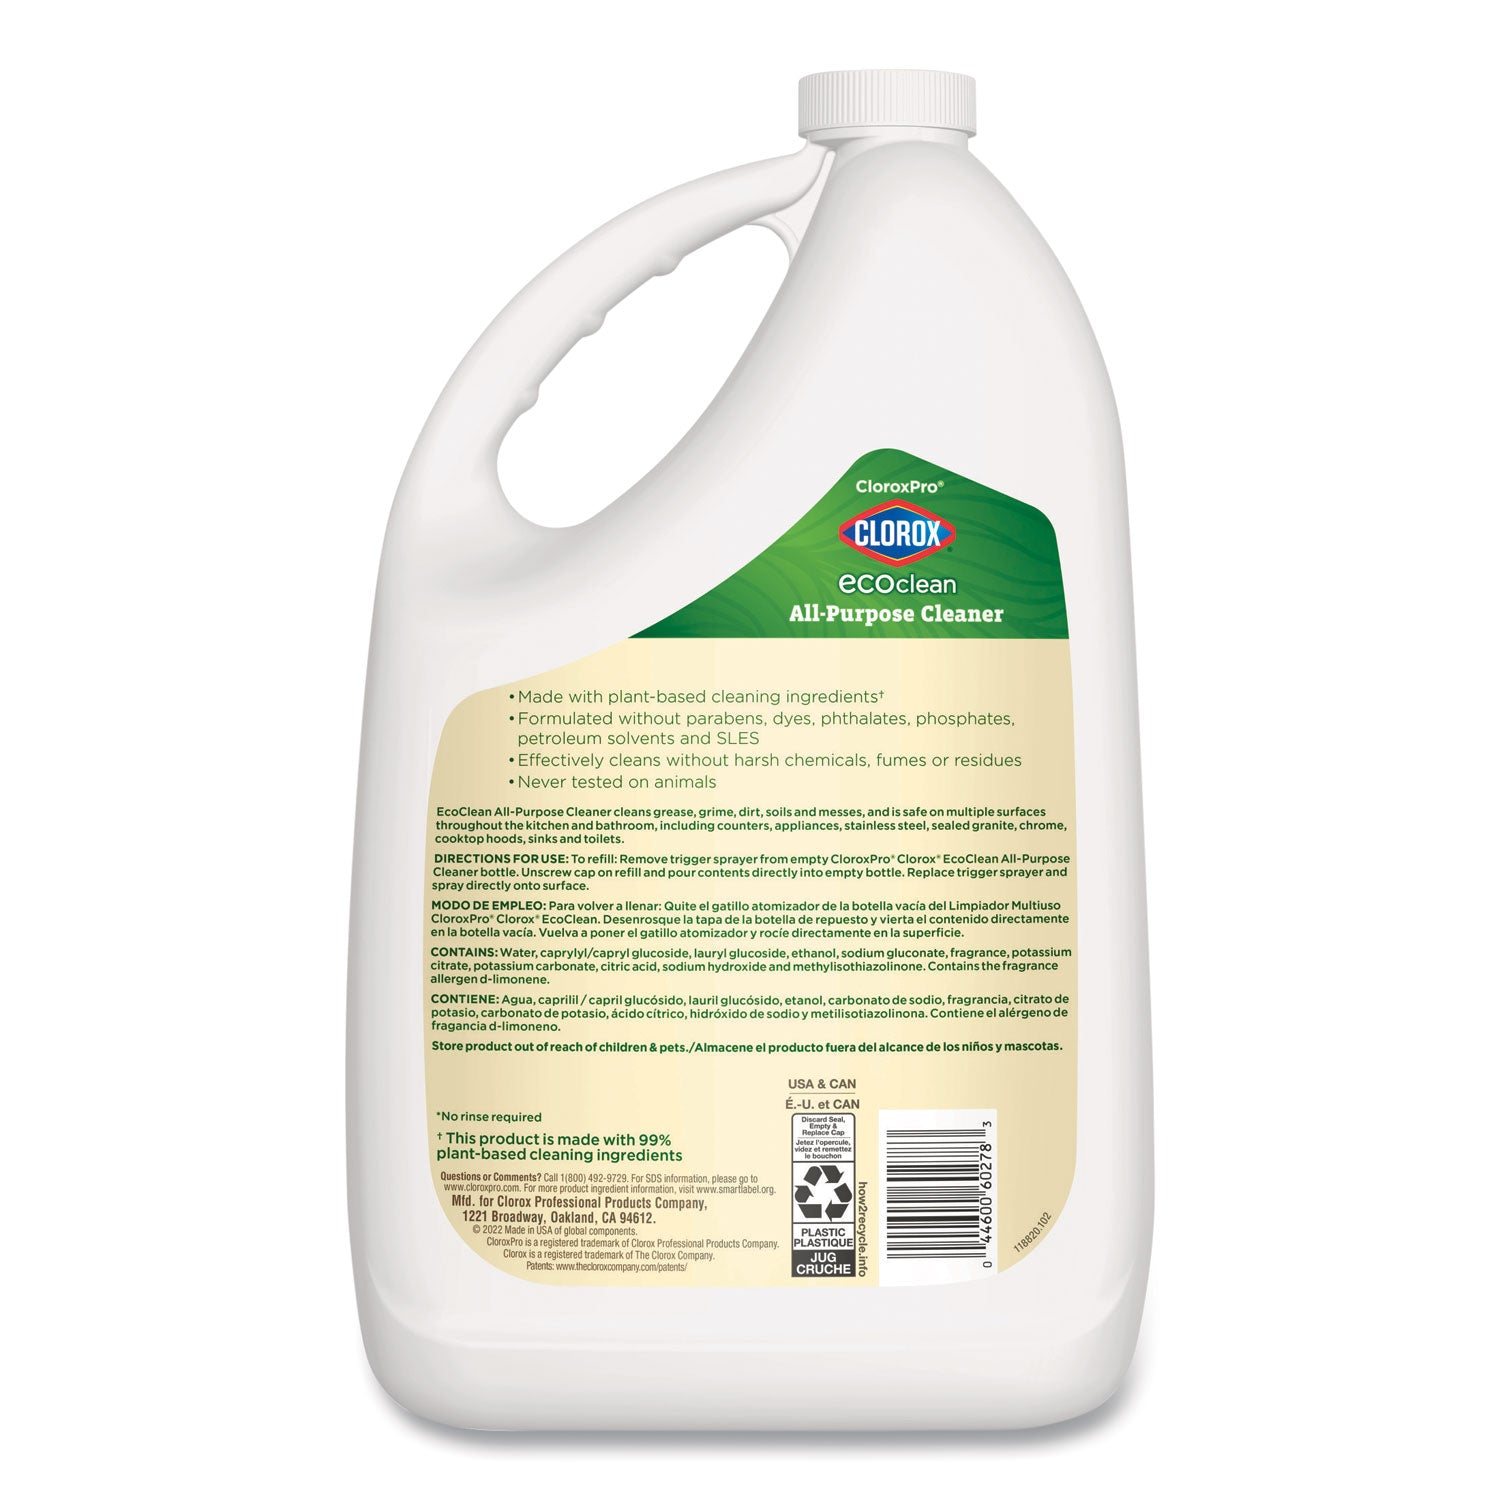 clorox-pro-ecoclean-all-purpose-cleaner-unscented-128-oz-bottle-4-carton_clo60278ct - 4